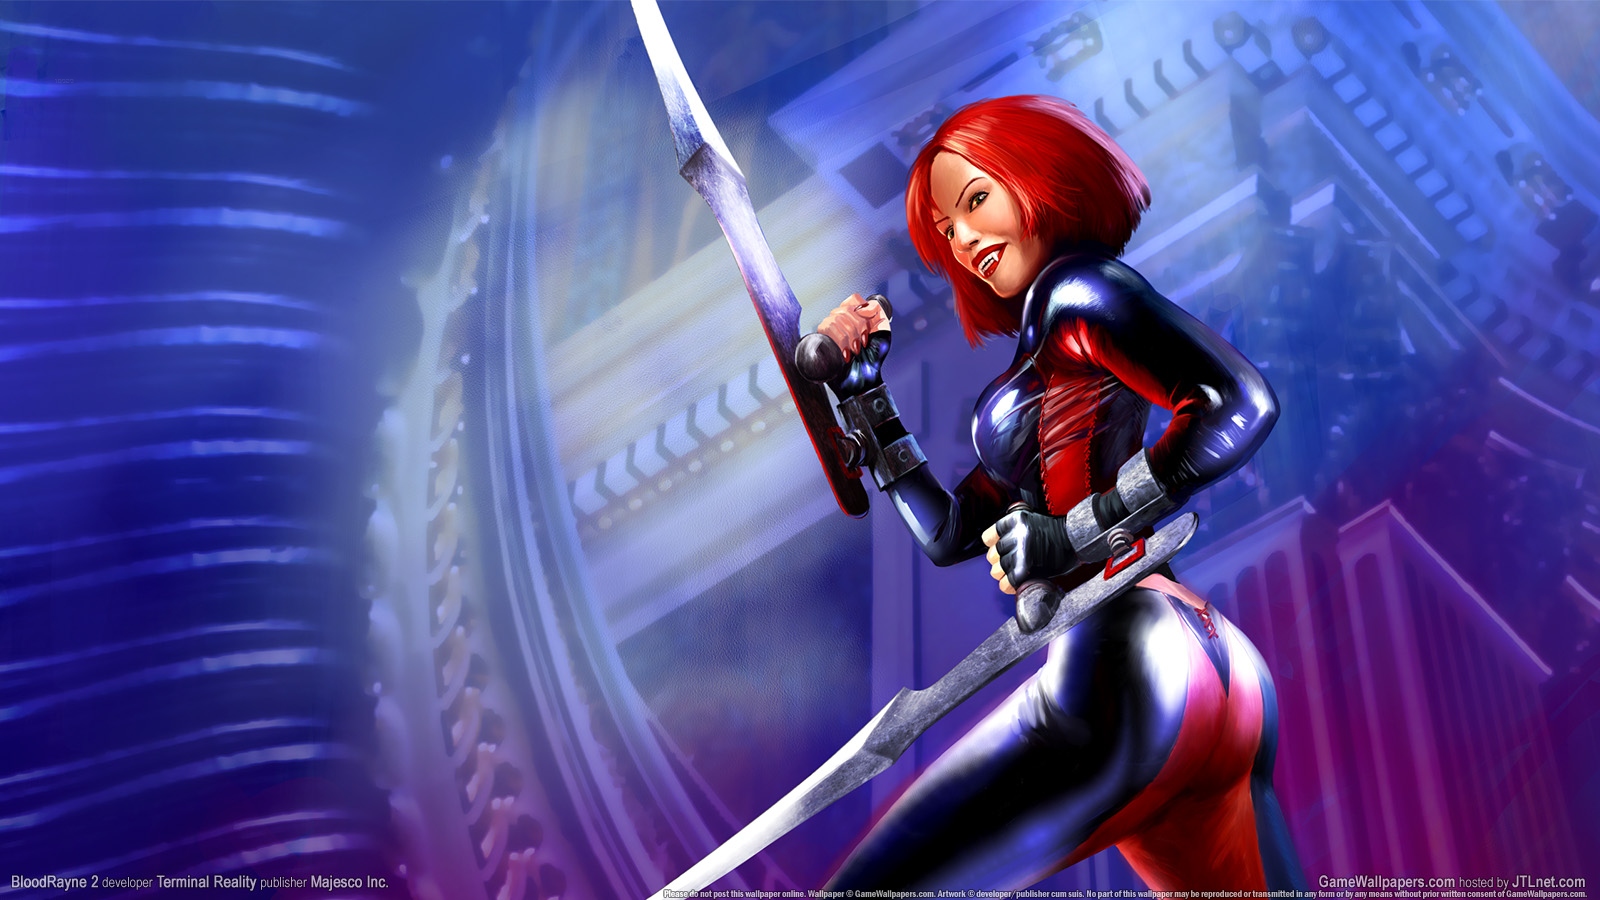 BloodRayne 2 1600x900 wallpaper or background 08